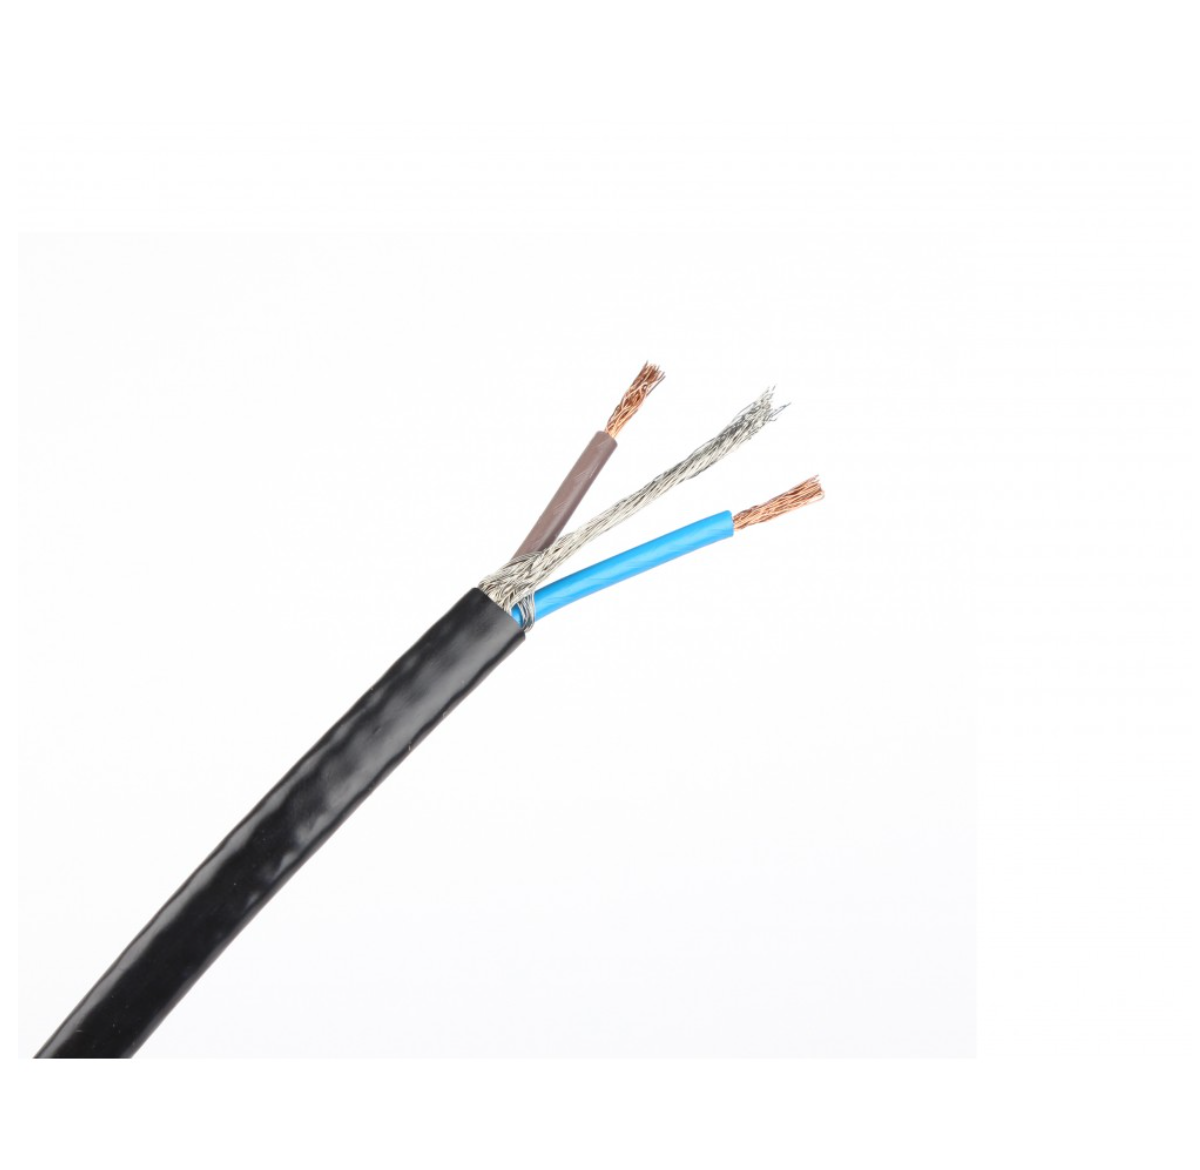 Heating cable - 220m